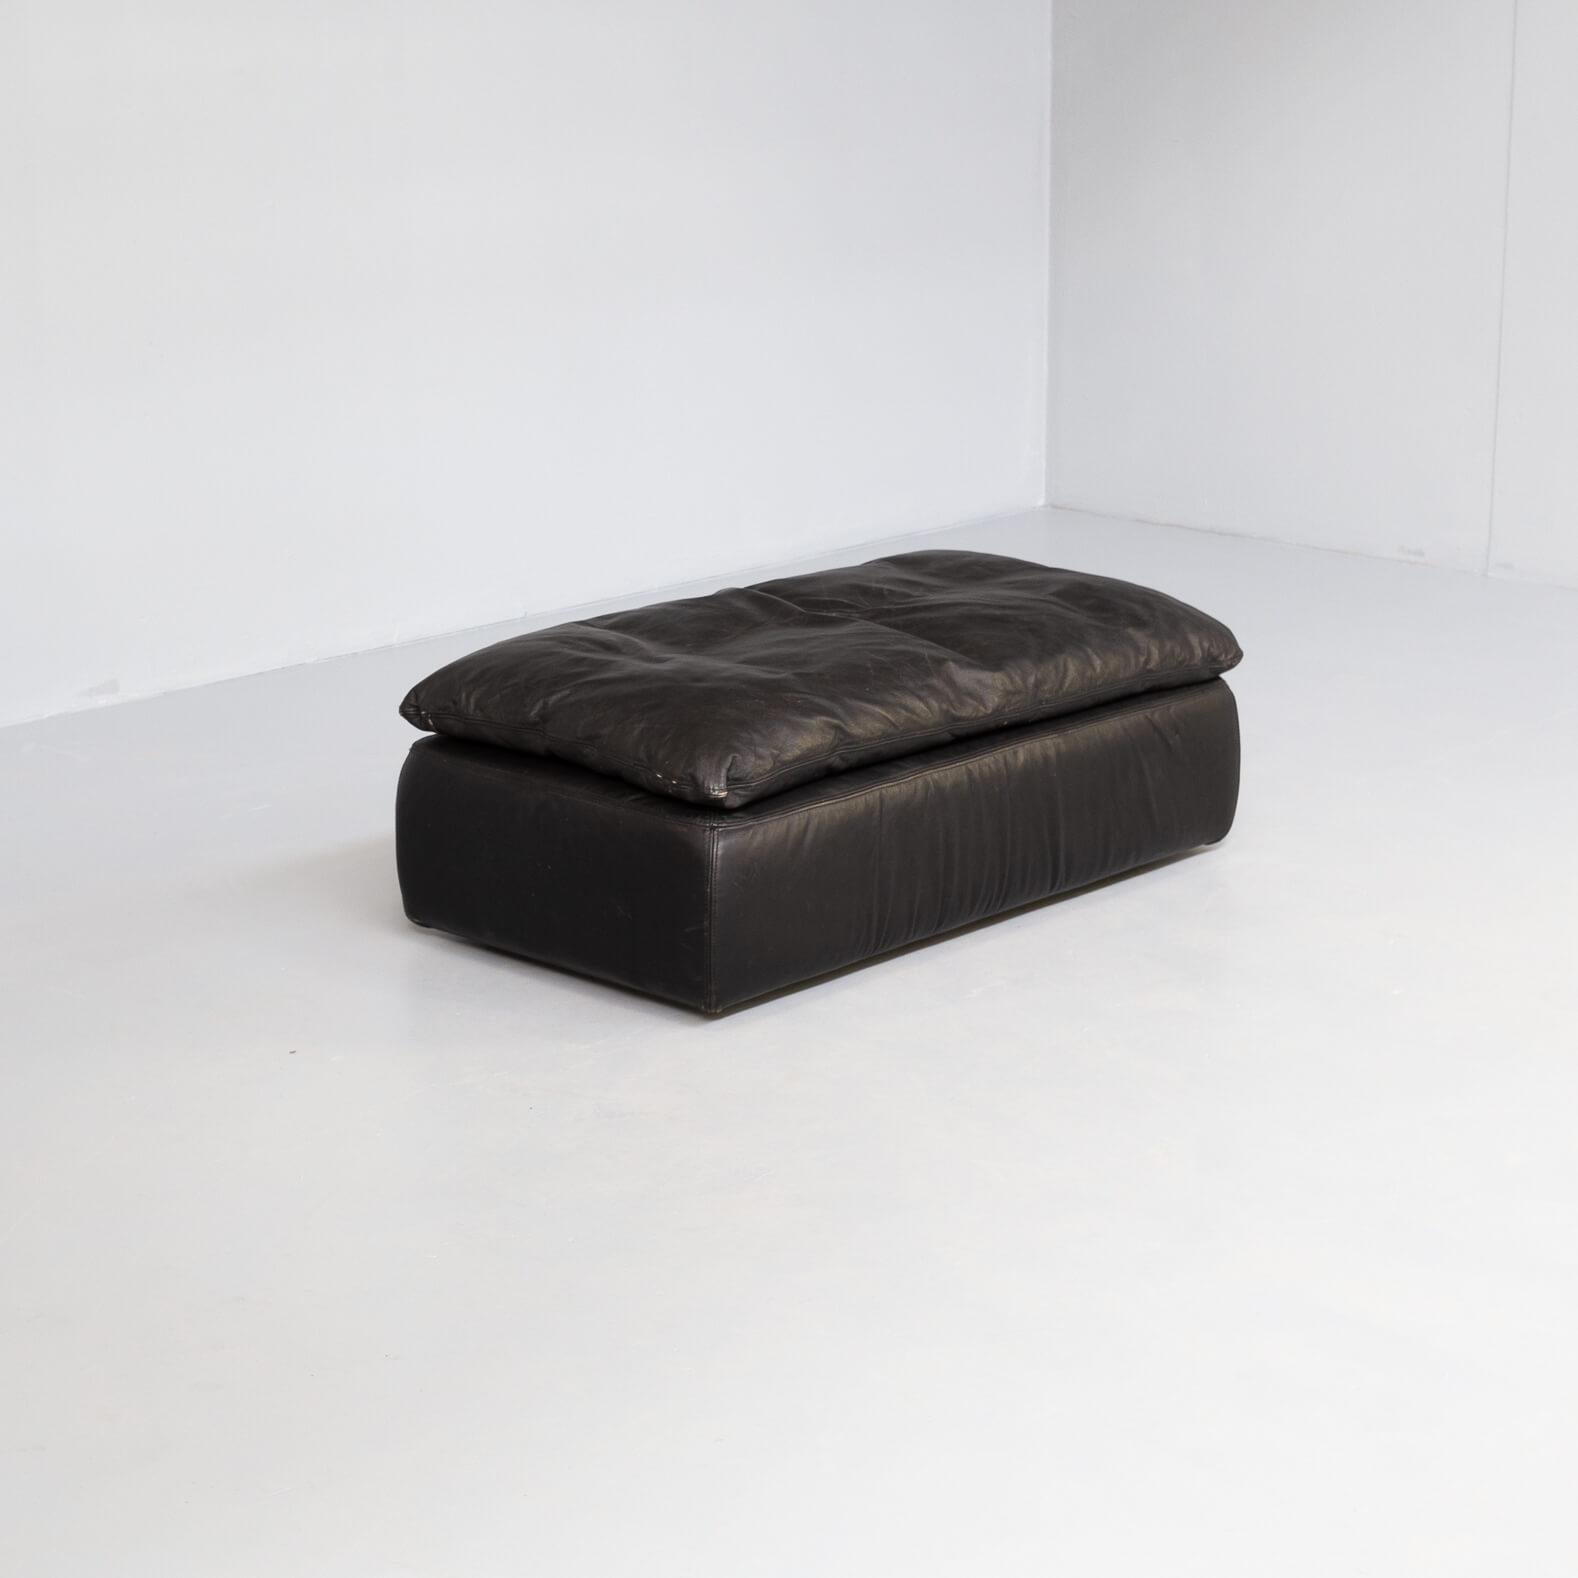 80s Black Leather Pouf, Sofa, Ottoman Attr. Walter Knoll Set/2 For Sale 4